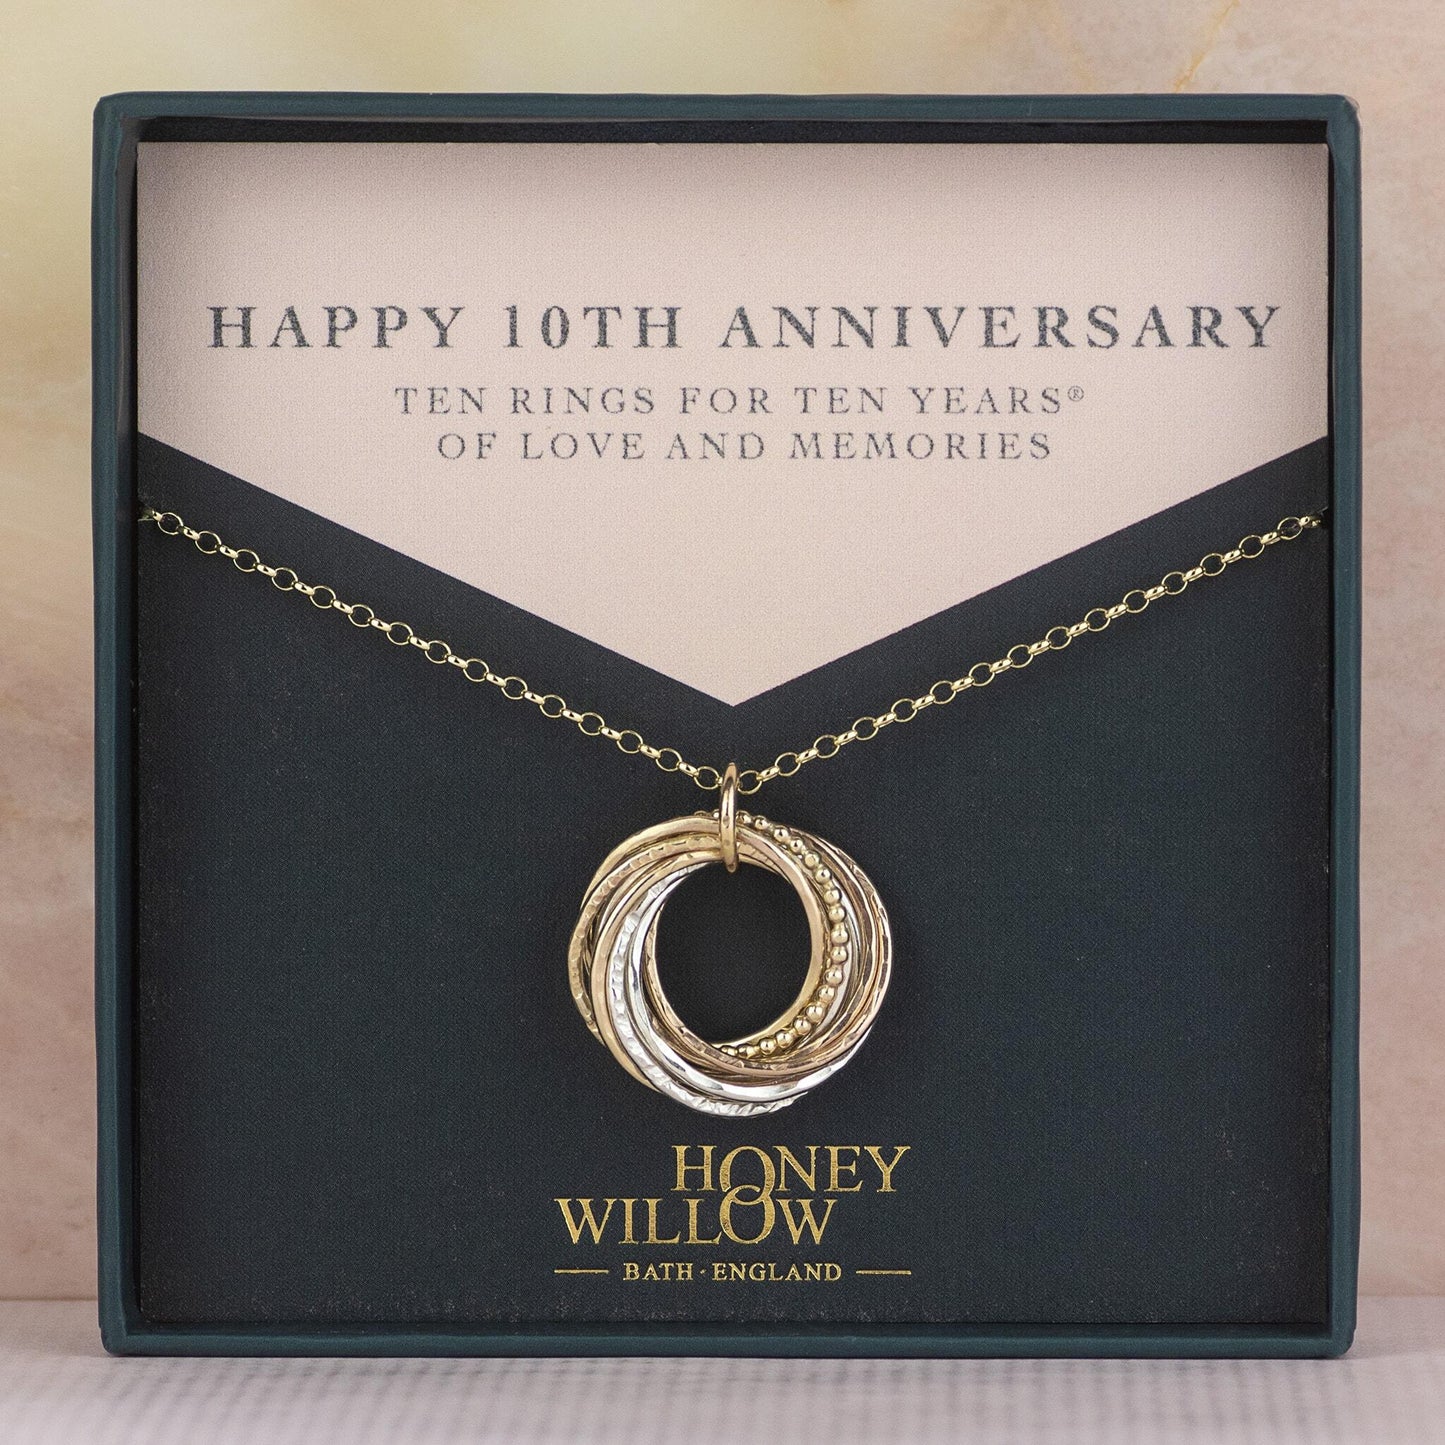 9kt Gold 10th Anniversary Necklace -  The Original 10 Links for 10 Years Necklace - Recycled Gold, Rose Gold & Silver